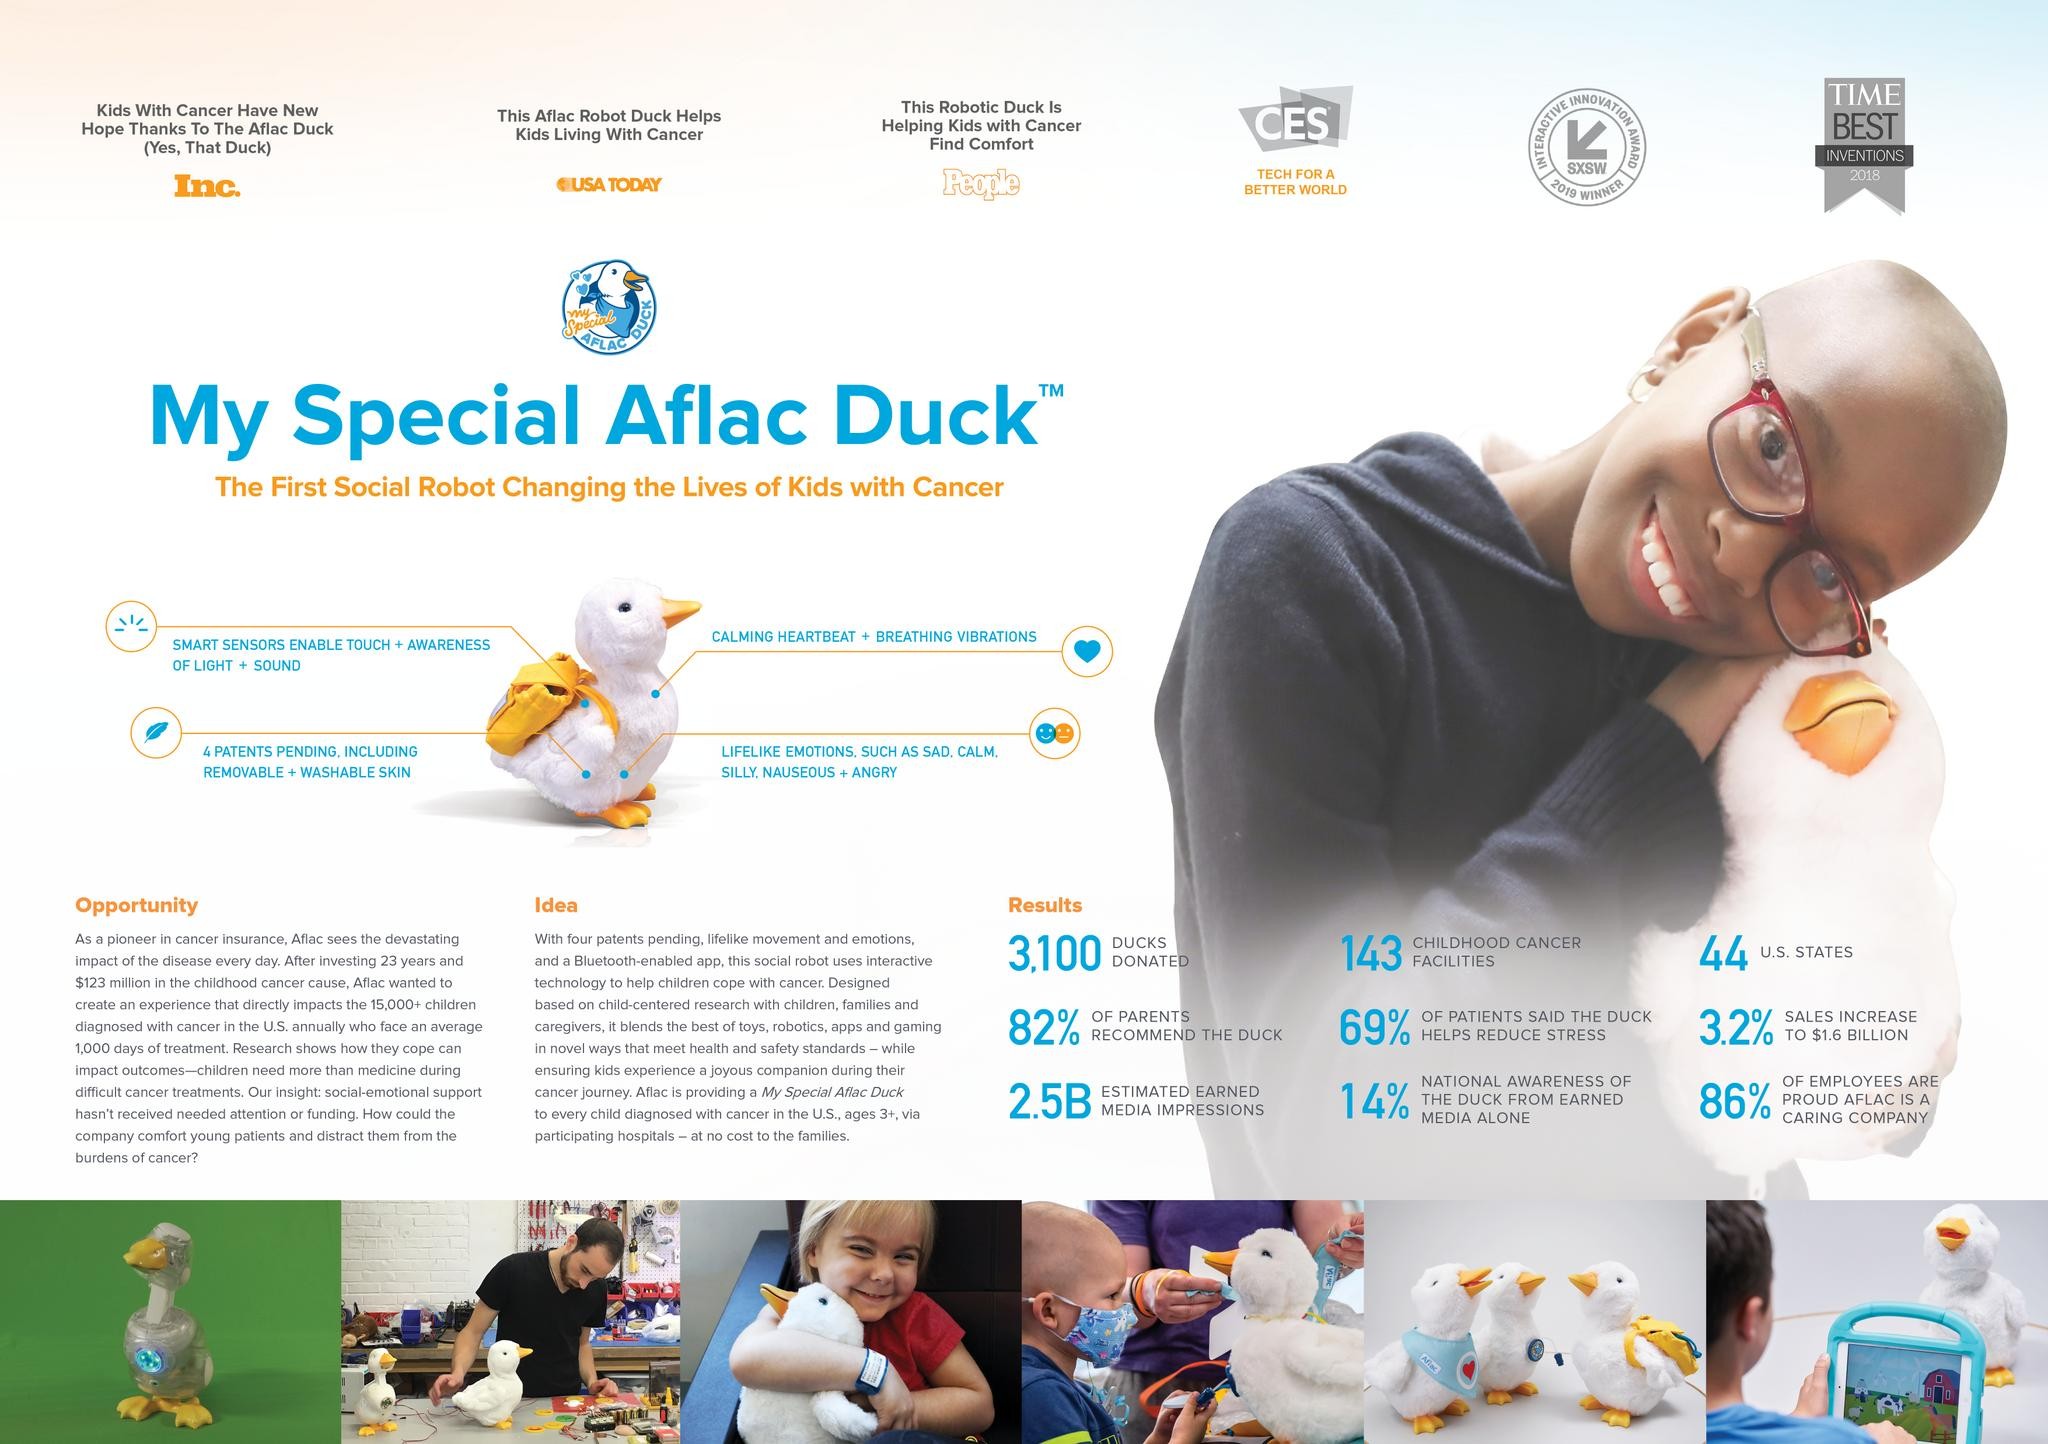 MY SPECIAL AFLAC DUCK